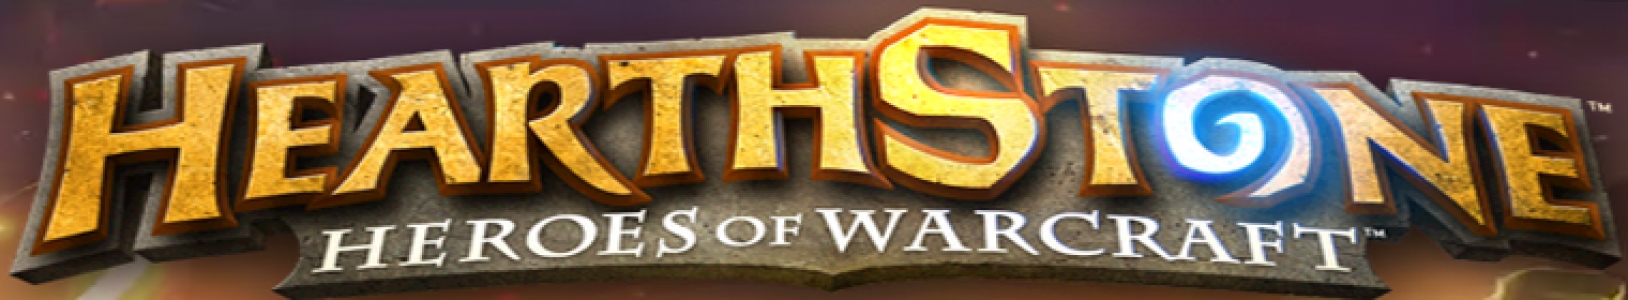 Hearthstone: Heroes of Warcraft banner